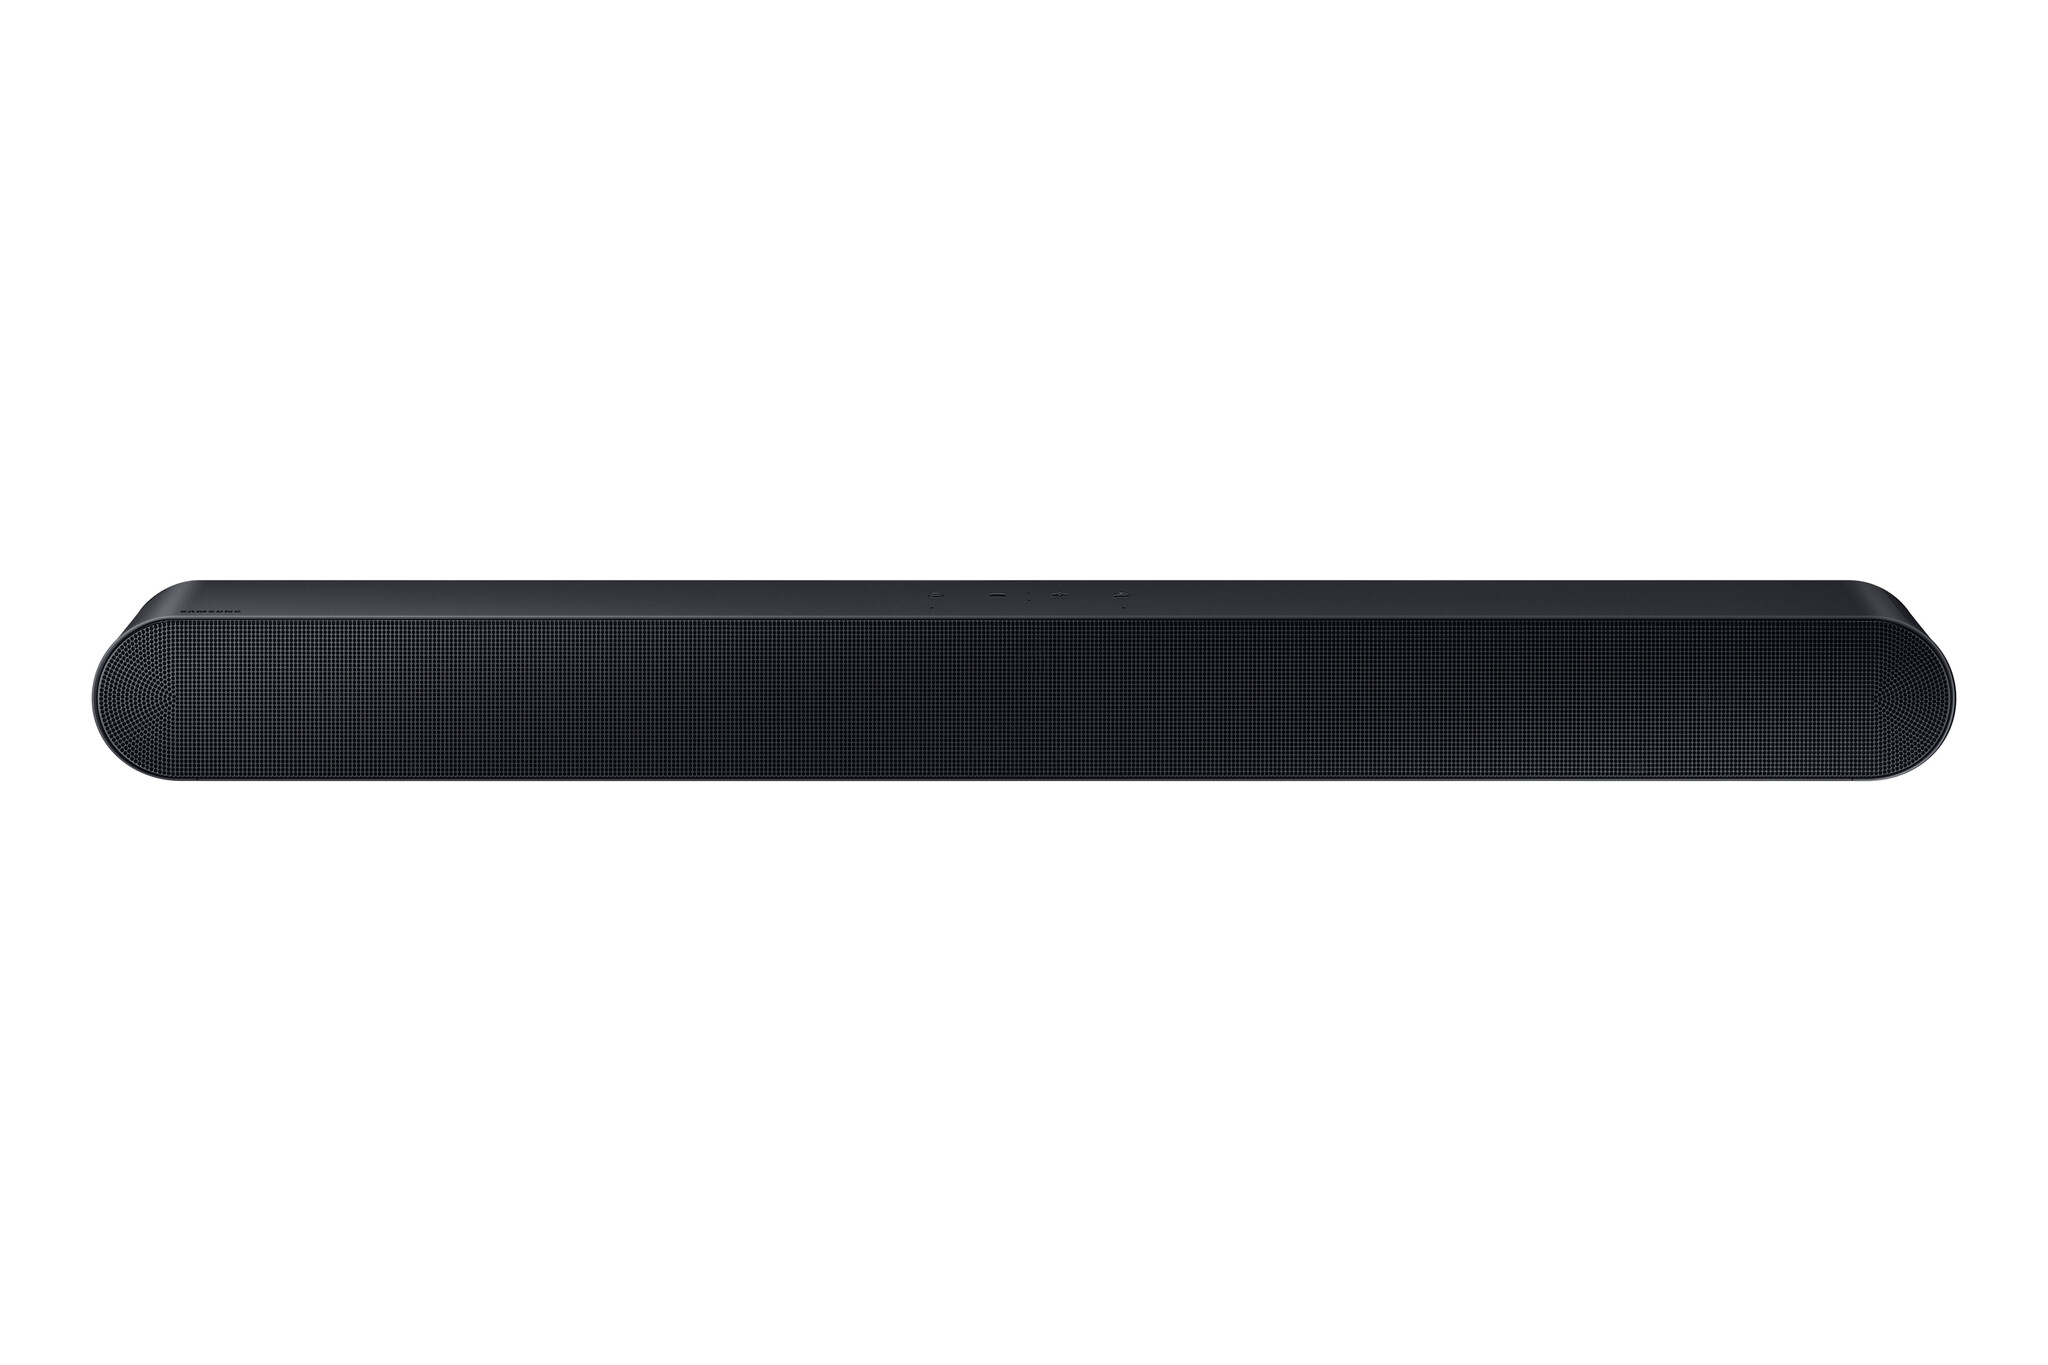 Samsung HW-S60B Bluetooth 5.0 Soundbar with Q-Symphony, Dolby Atmos® and DTS, and 7 Built-In Speakers #364319